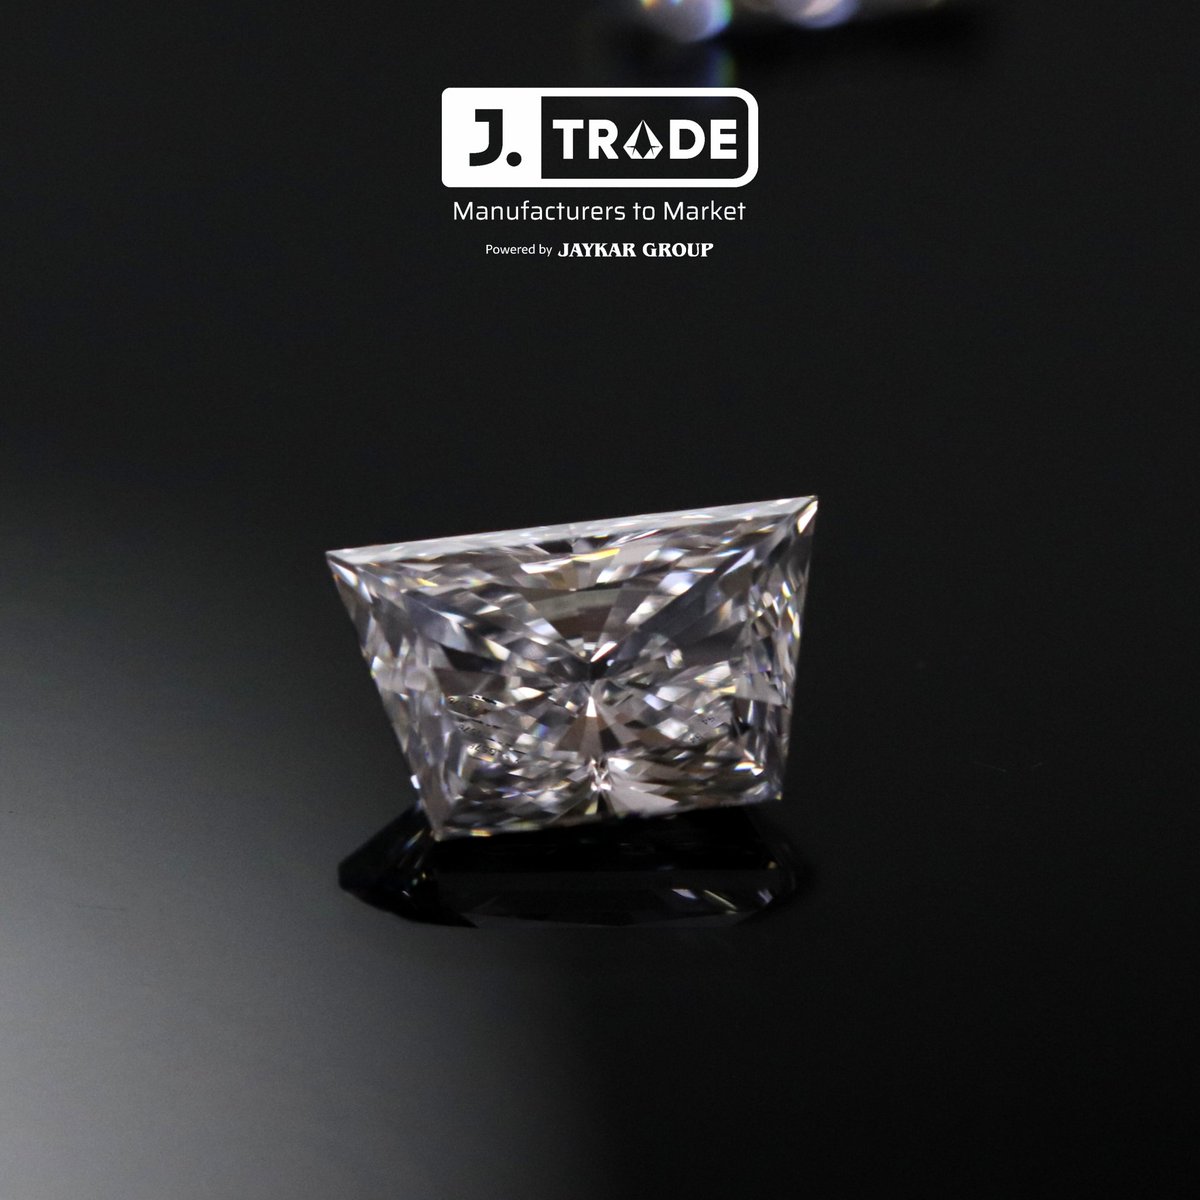 The trapezoid cut diamond is a four sided shaped with the top and bottom sides parallel and the other sides slanting inward. The outline looks like a triangle with one of the ends cut off.
#Diamonds #polish #fancydiamond #Trapezoidcut #diamondpair #solitairediamond